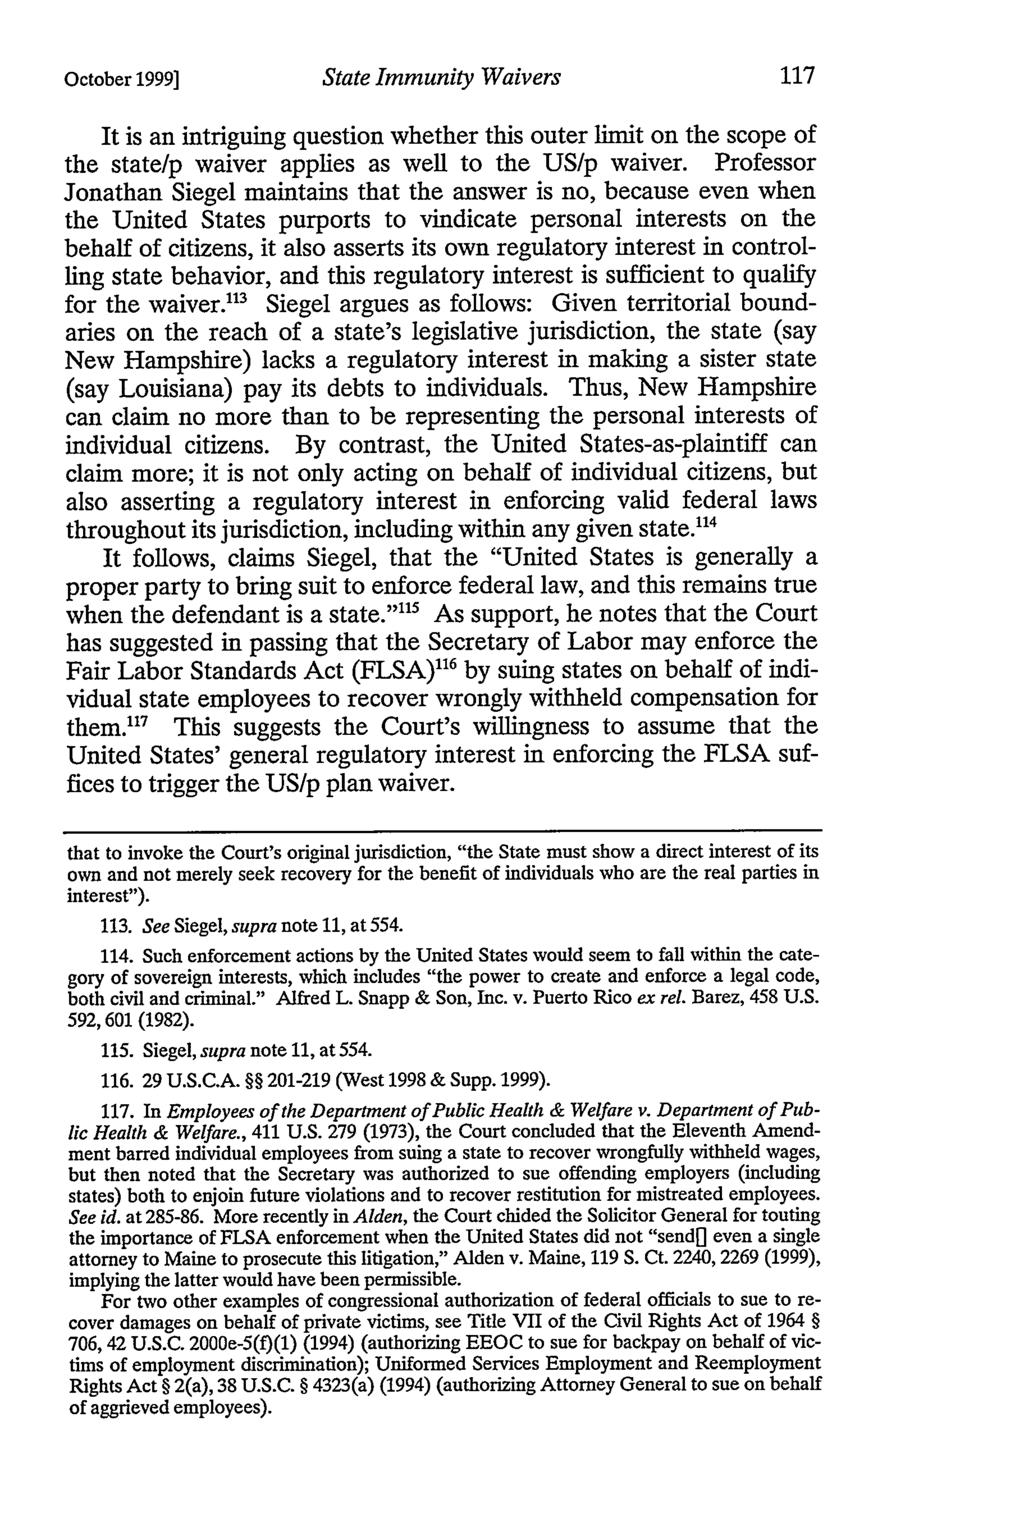 October 19991 State Immunity Waivers It is an intriguing question whether this outer limit on the scope of the state/p waiver applies as well to the US/p waiver.